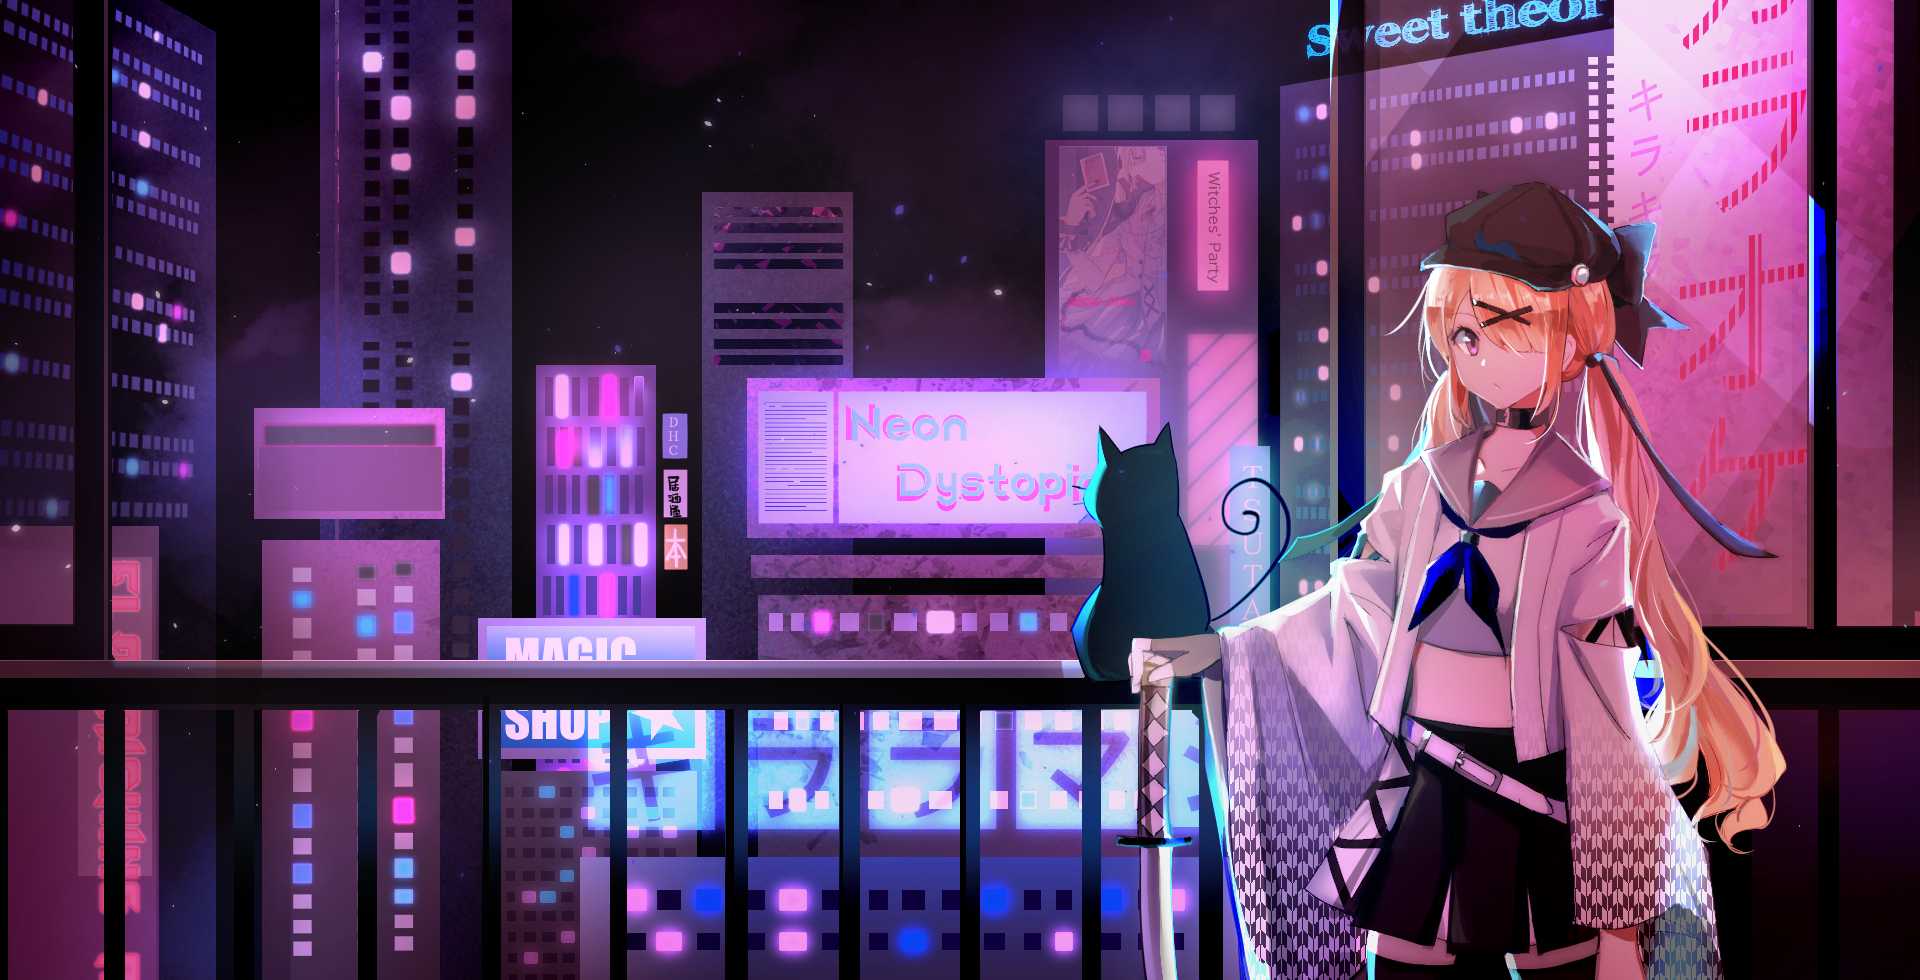 Anime Anime Girls Blonde Cats Black Cats Fence Night City Neon Japanese Clothes Katana Twintails Vio Wallpaper:1920x980